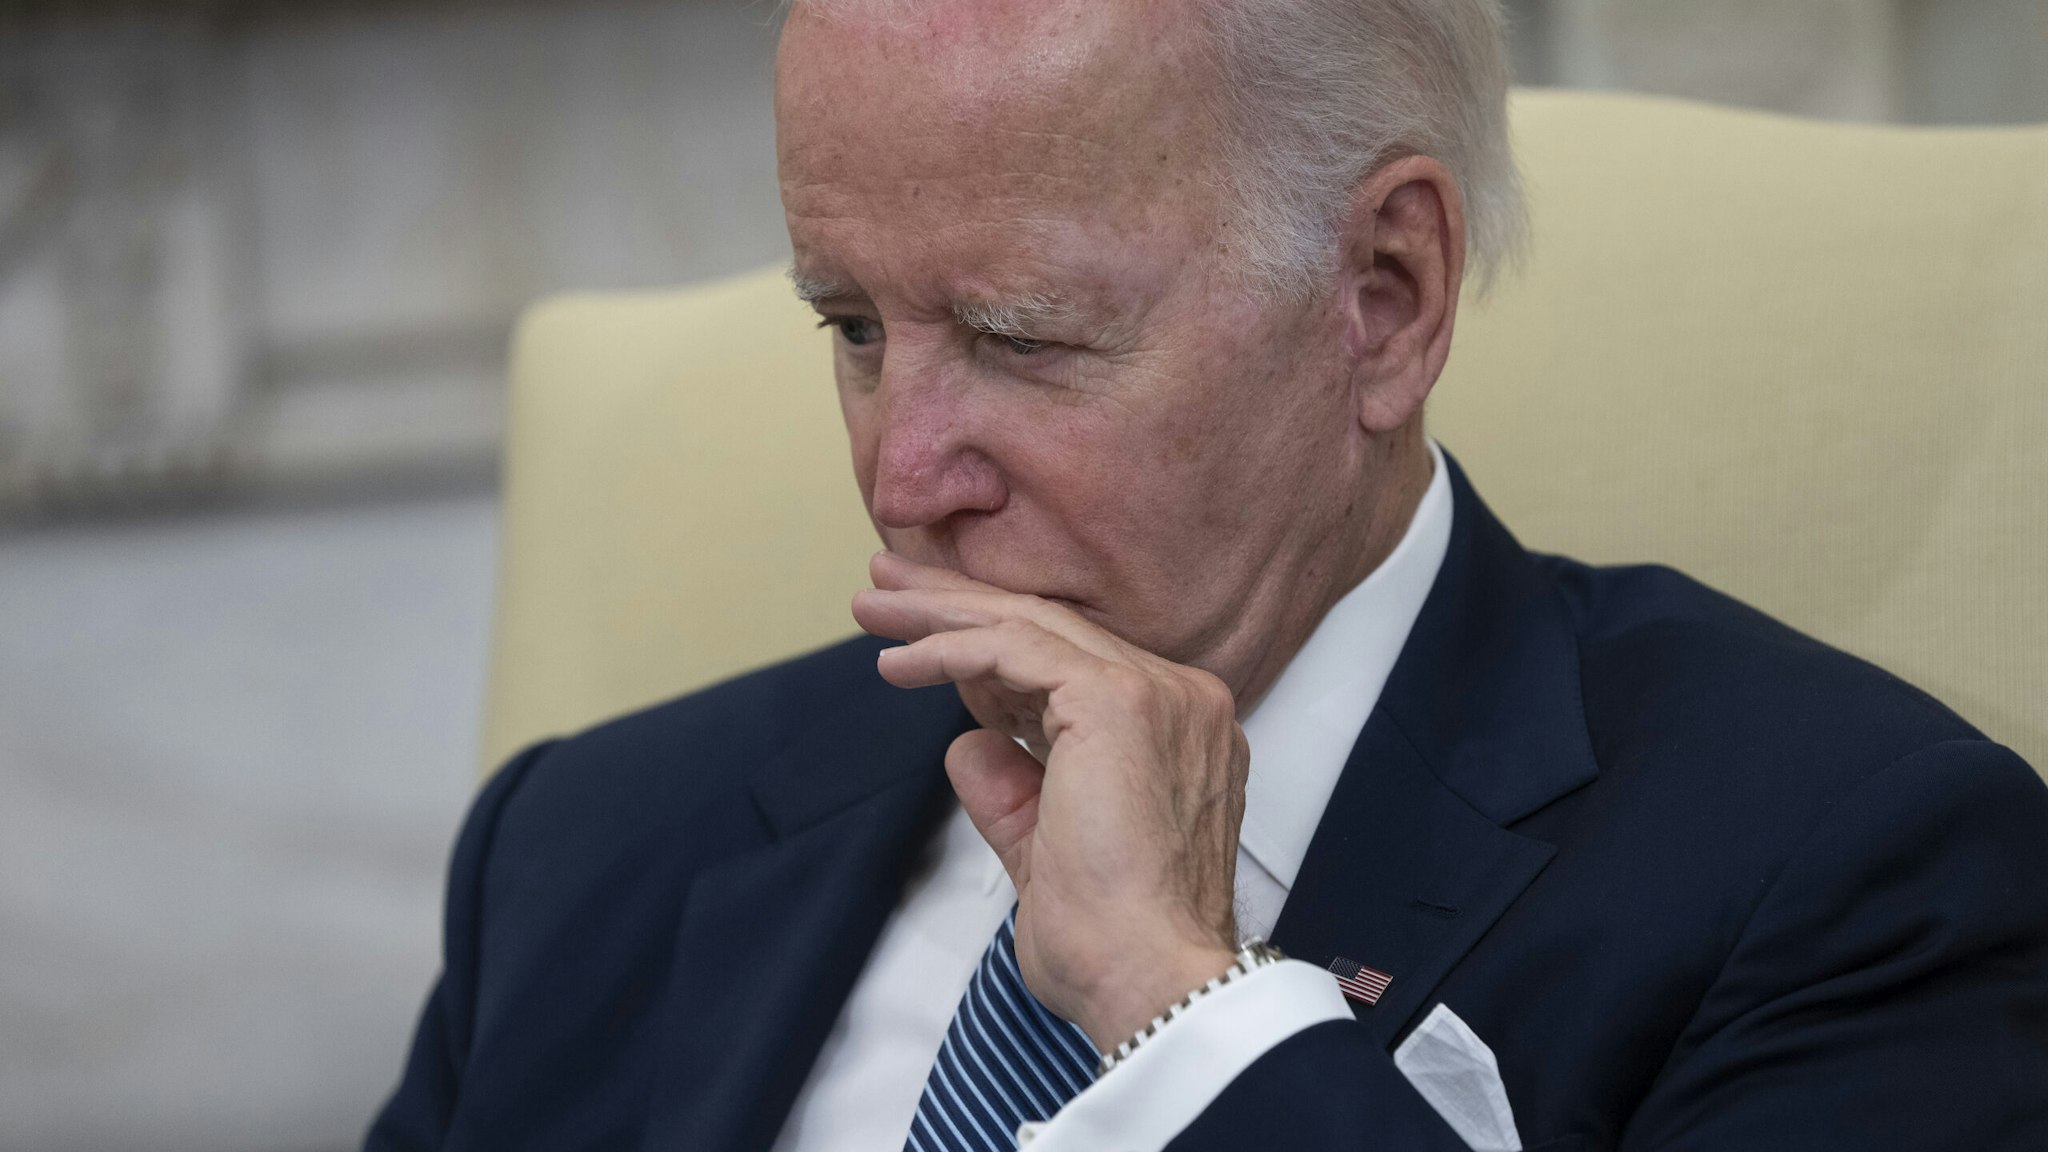 Then-candidate Joe Biden had to be propped up by pills given to him by his wife during the 2020 campaign, according to Tucker Carlson